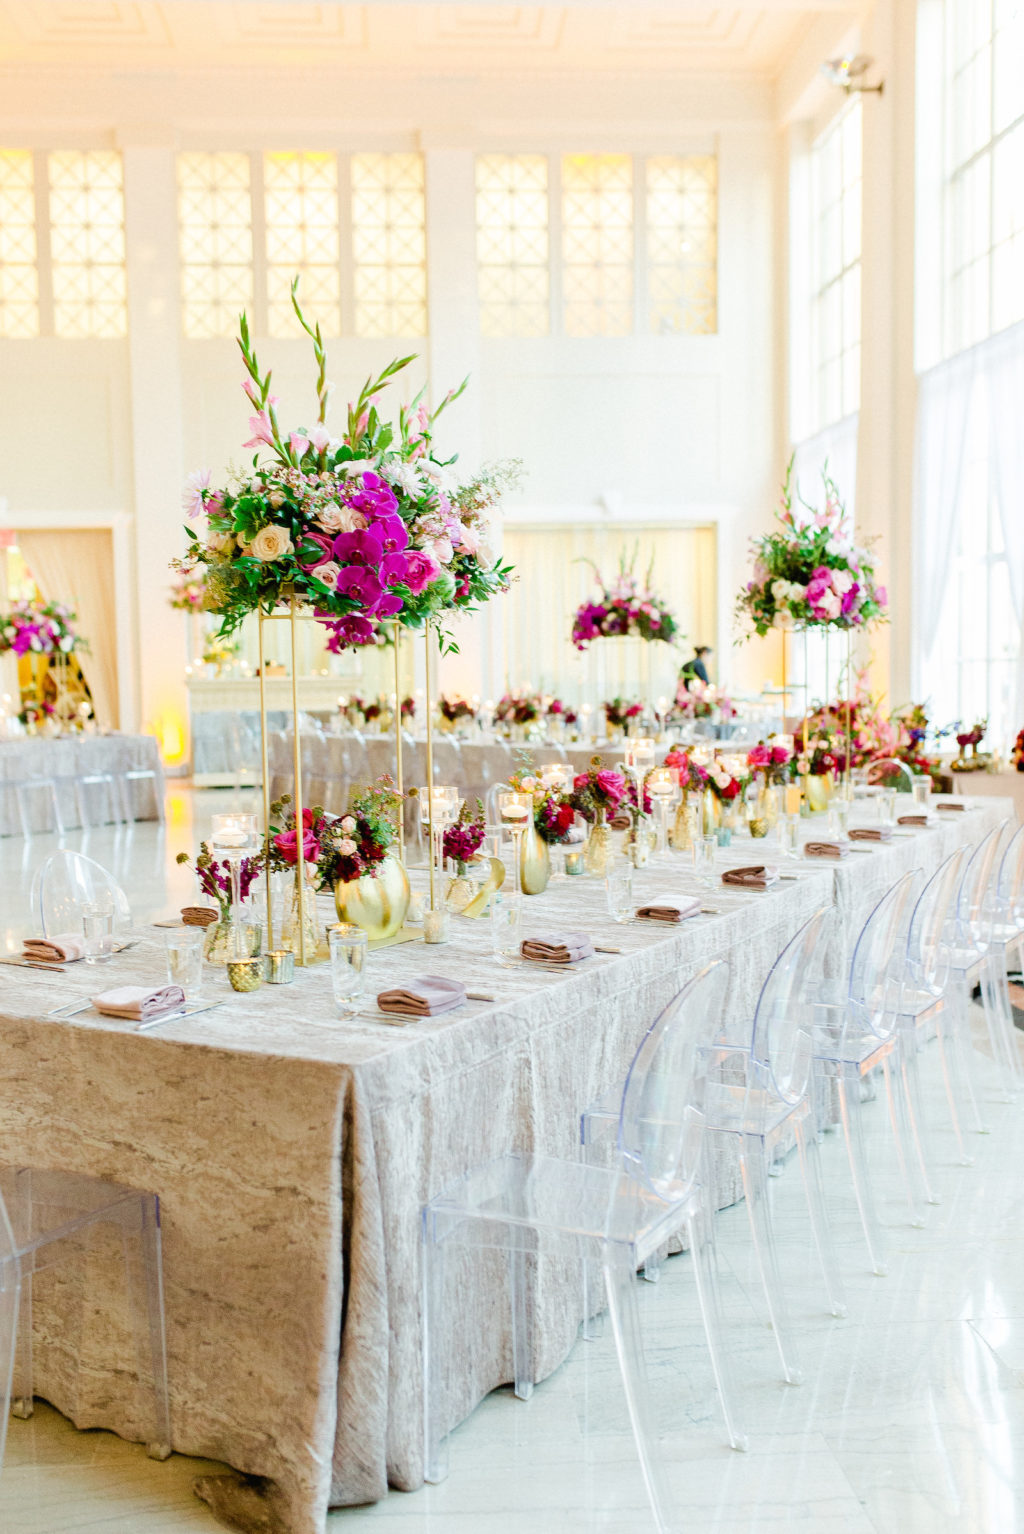 Colorful Luxury Indoor Wedding Reception at Tampa Wedding Venue The Vault | Feasting Tables with Ghost Chairs and Tall Centerpieces of Pink Gladiolas, Roses, Orchids and Greenery with Gold Bud Vases and Candles | Kate Ryan Event Rentals